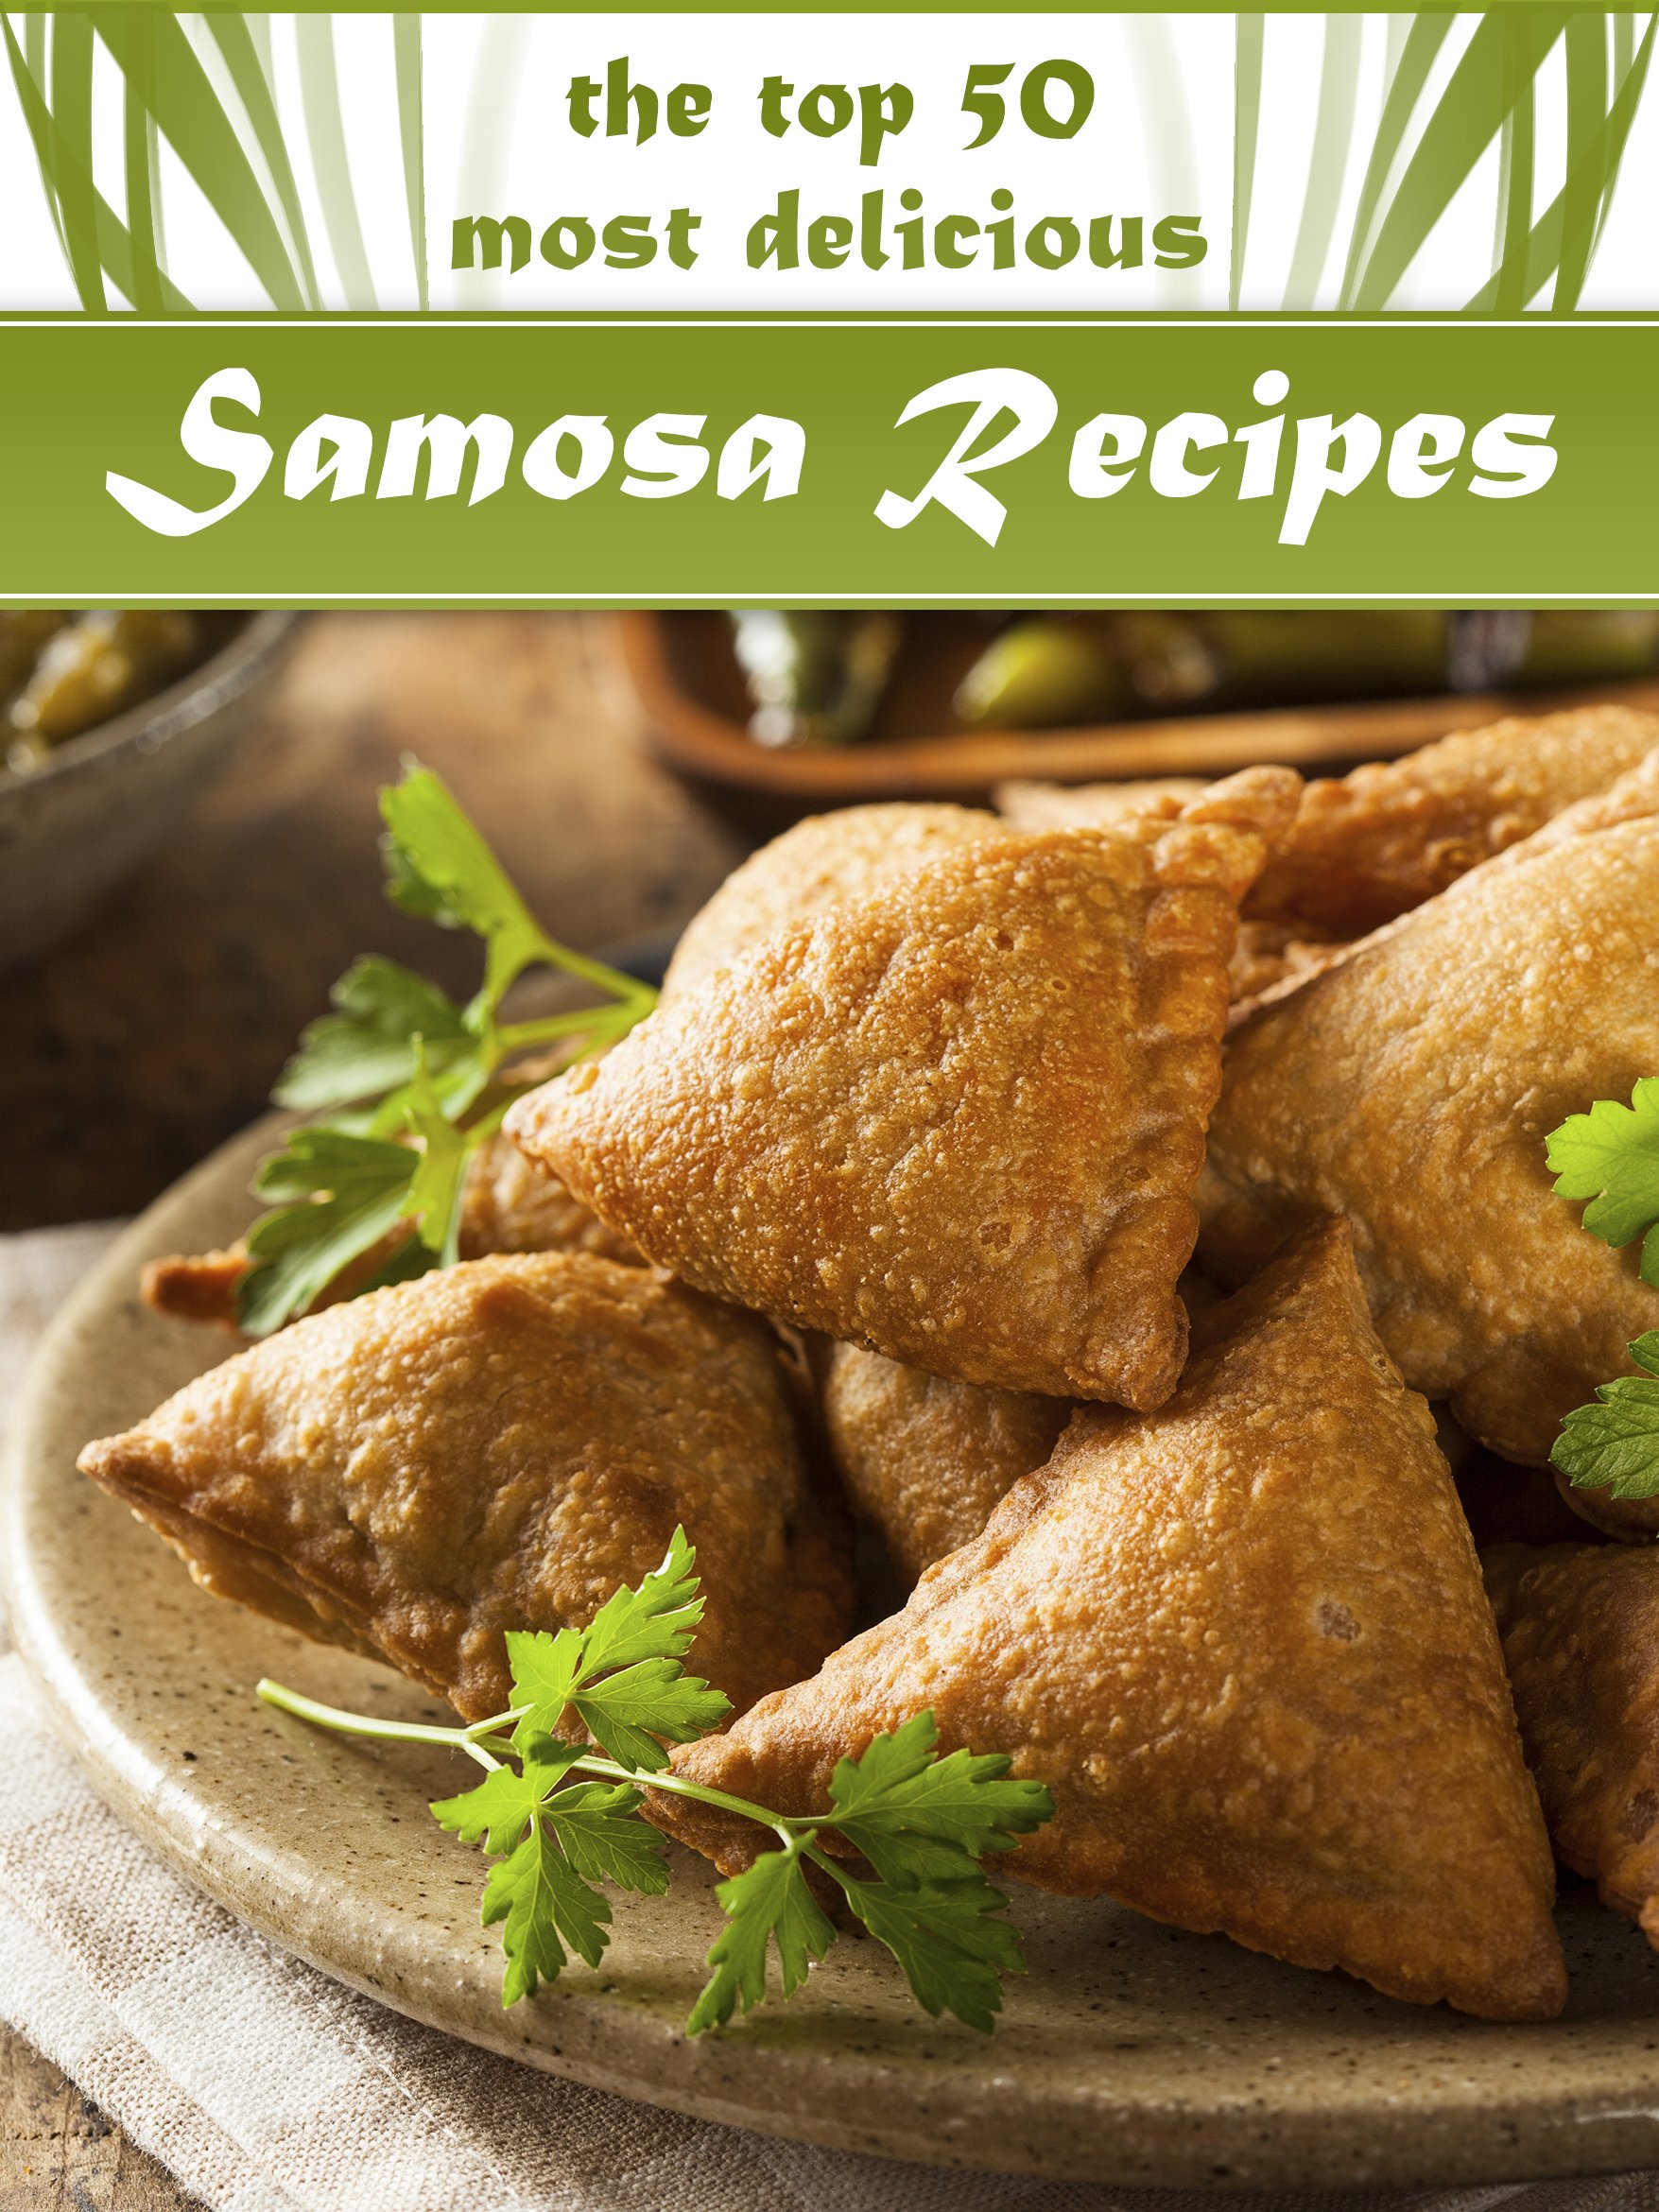 Samosas: The Top 50 Most Delicious Samosa Recipes - Tasty Little Indian Snacks (Recipe Top 50's Book 33)